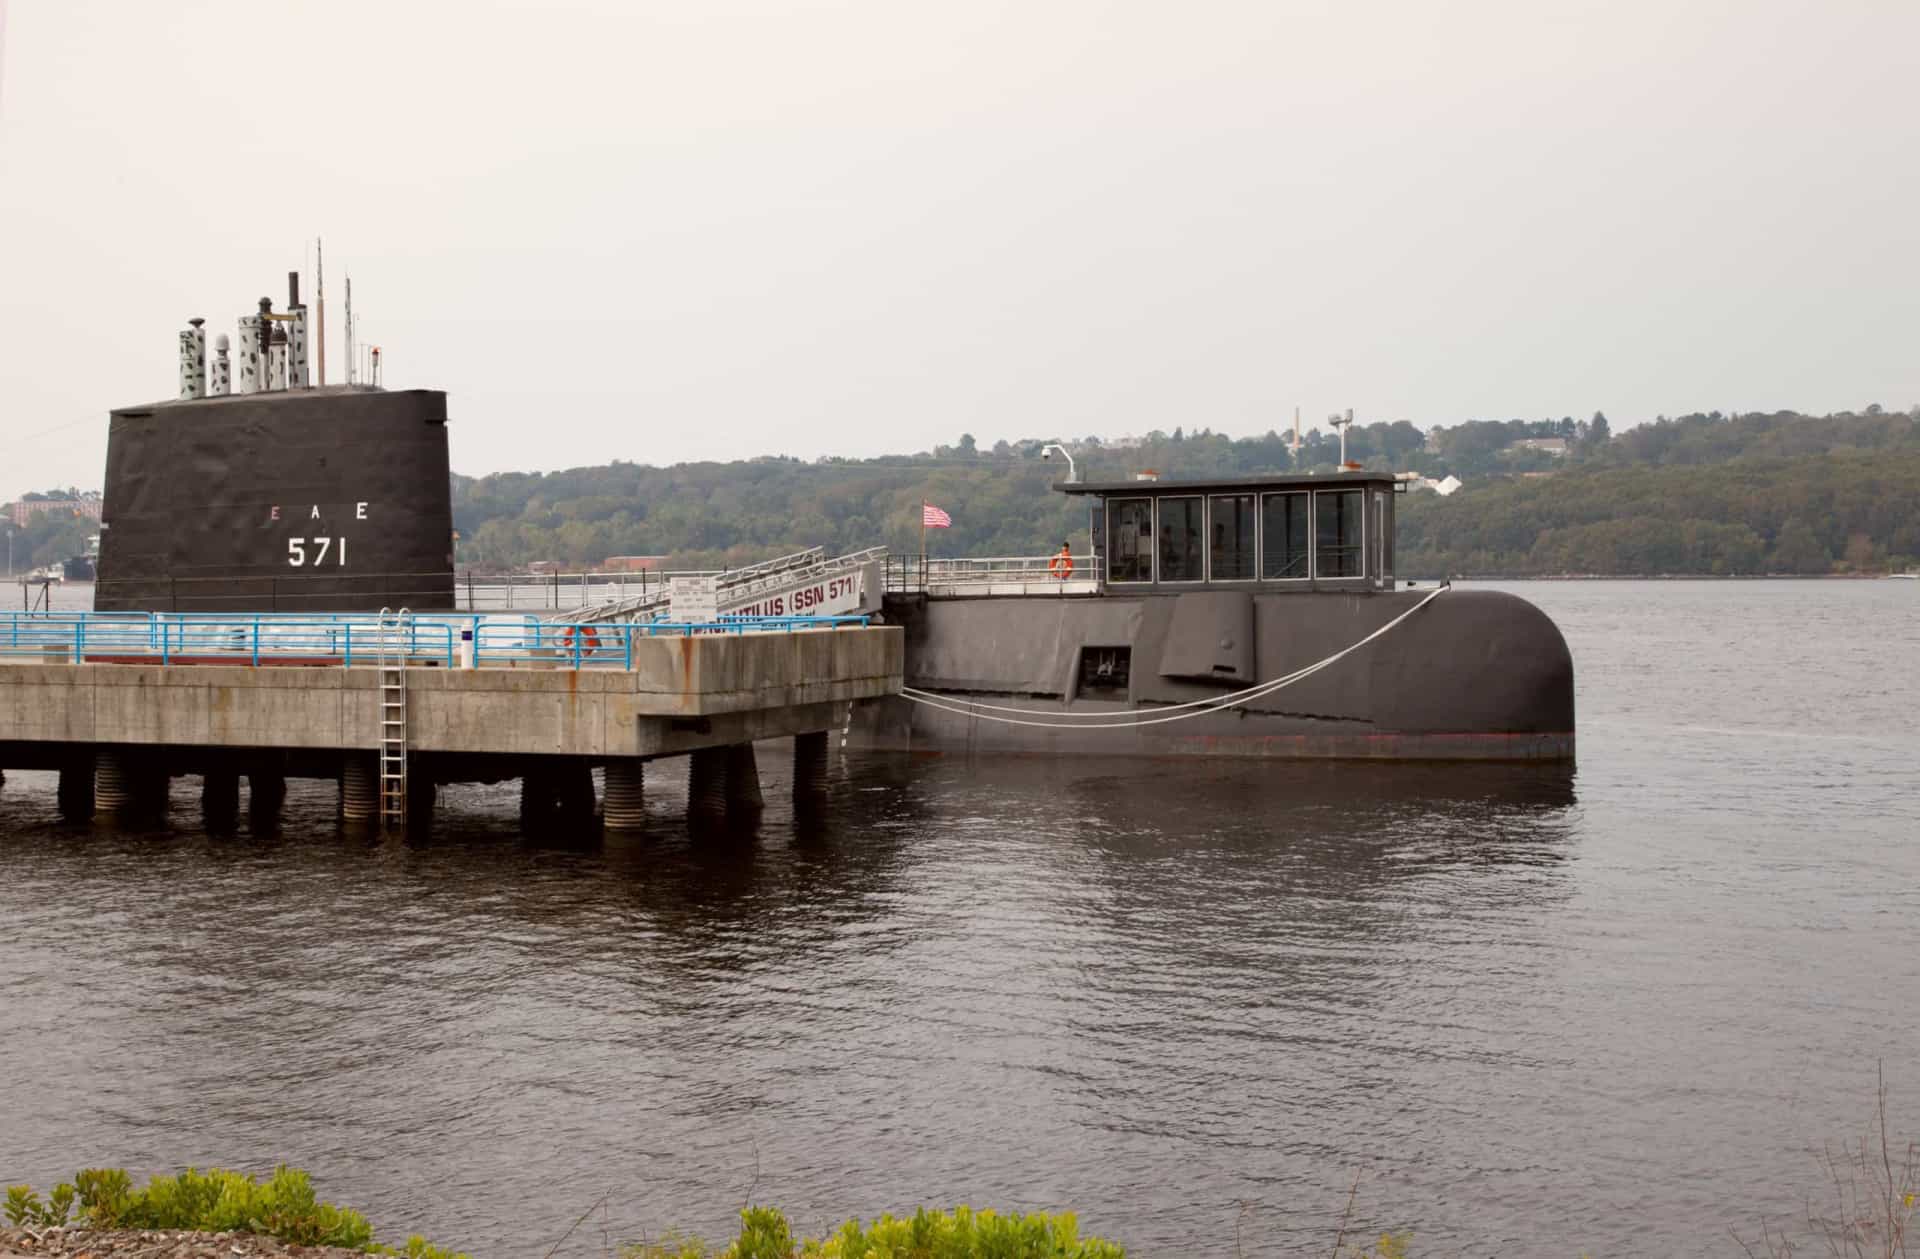 <p>Anyone with an interest in the US Navy and especially submarines should dive down to Groton and explore this unique museum. Pride of place is taken by the USS <em>Nautilus</em>—the world's first operational nuclear-powered submarine. In commission until 1980, the vessel is open to the public.</p><p><a href="https://www.msn.com/en-us/community/channel/vid-7xx8mnucu55yw63we9va2gwr7uihbxwc68fxqp25x6tg4ftibpra?cvid=94631541bc0f4f89bfd59158d696ad7e">Follow us and access great exclusive content everyday</a></p>